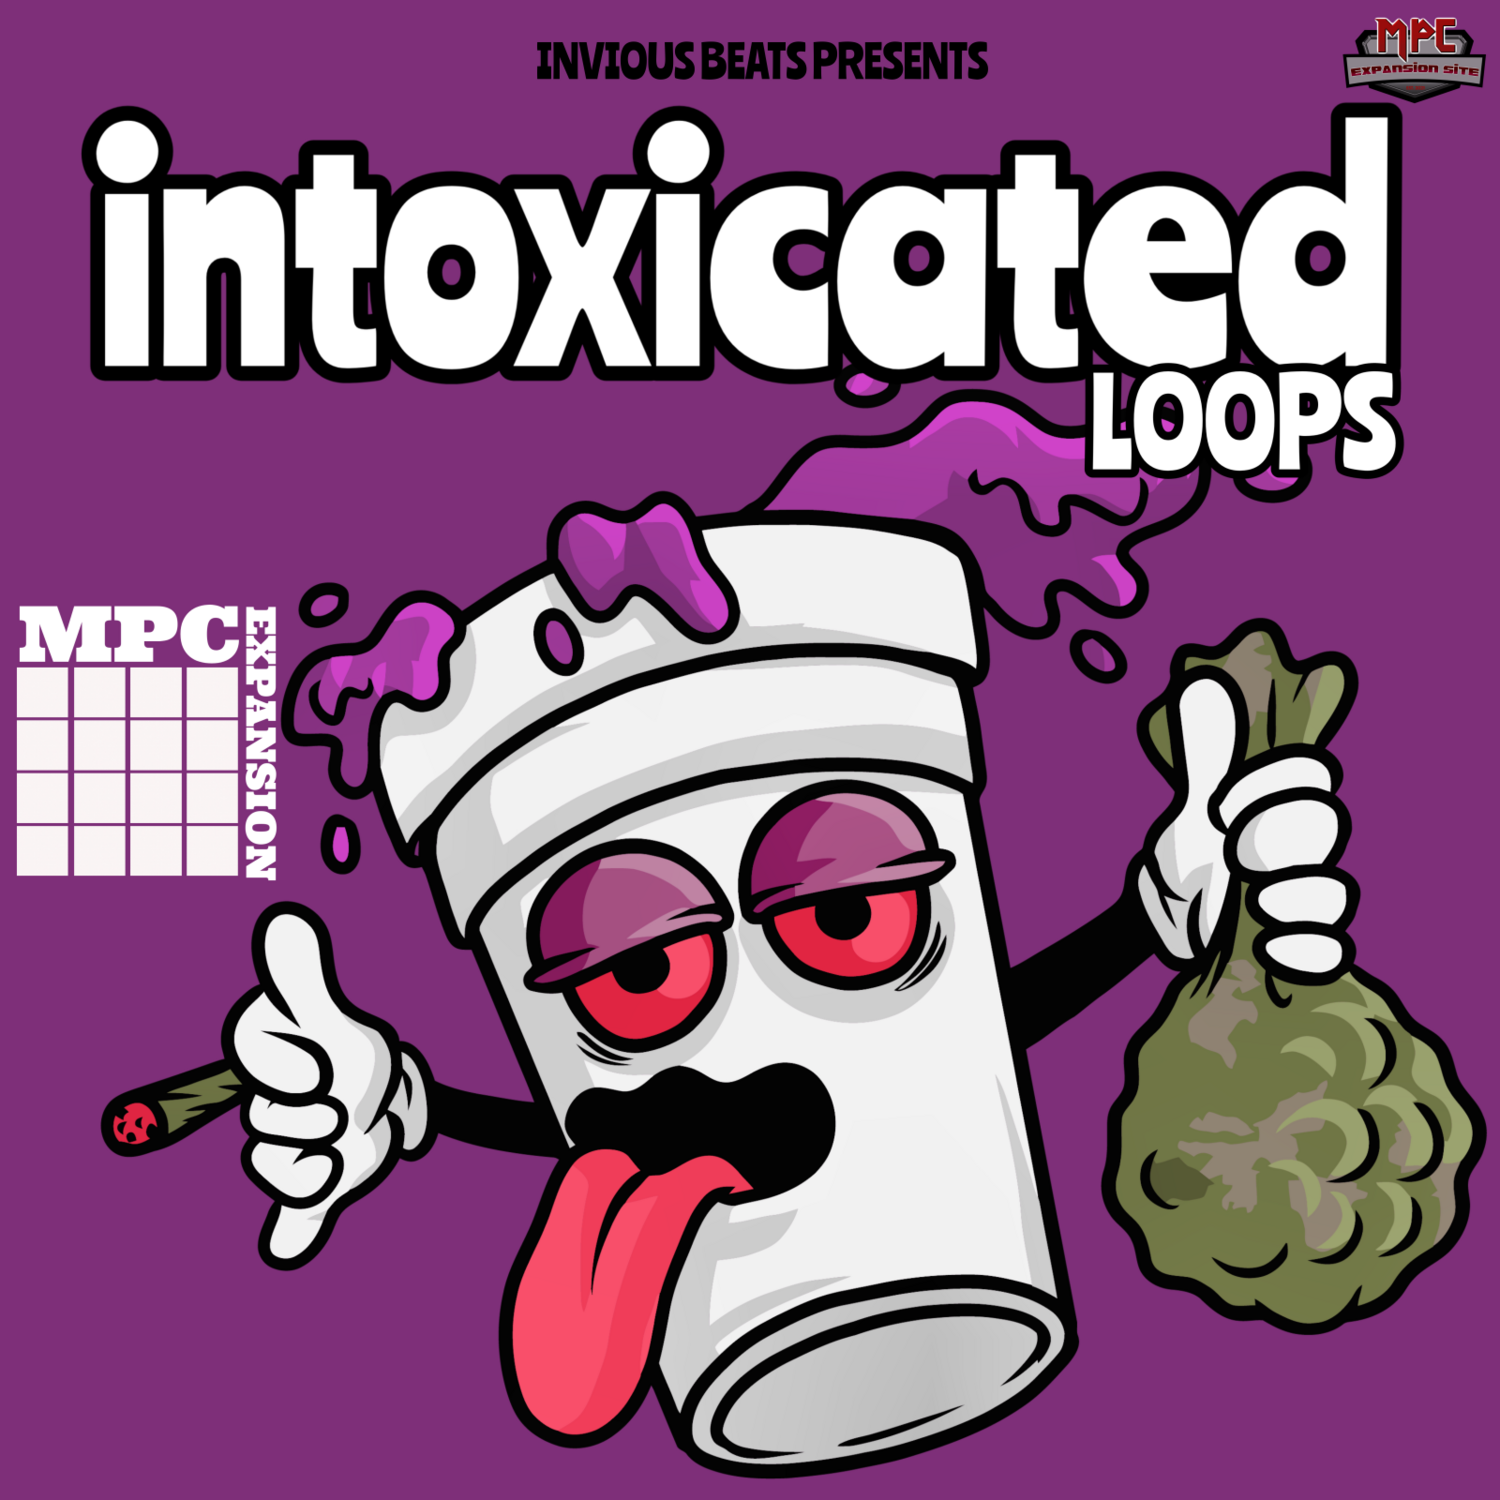 MPC EXPANSION 'INTOXICATED' by INVIOUS